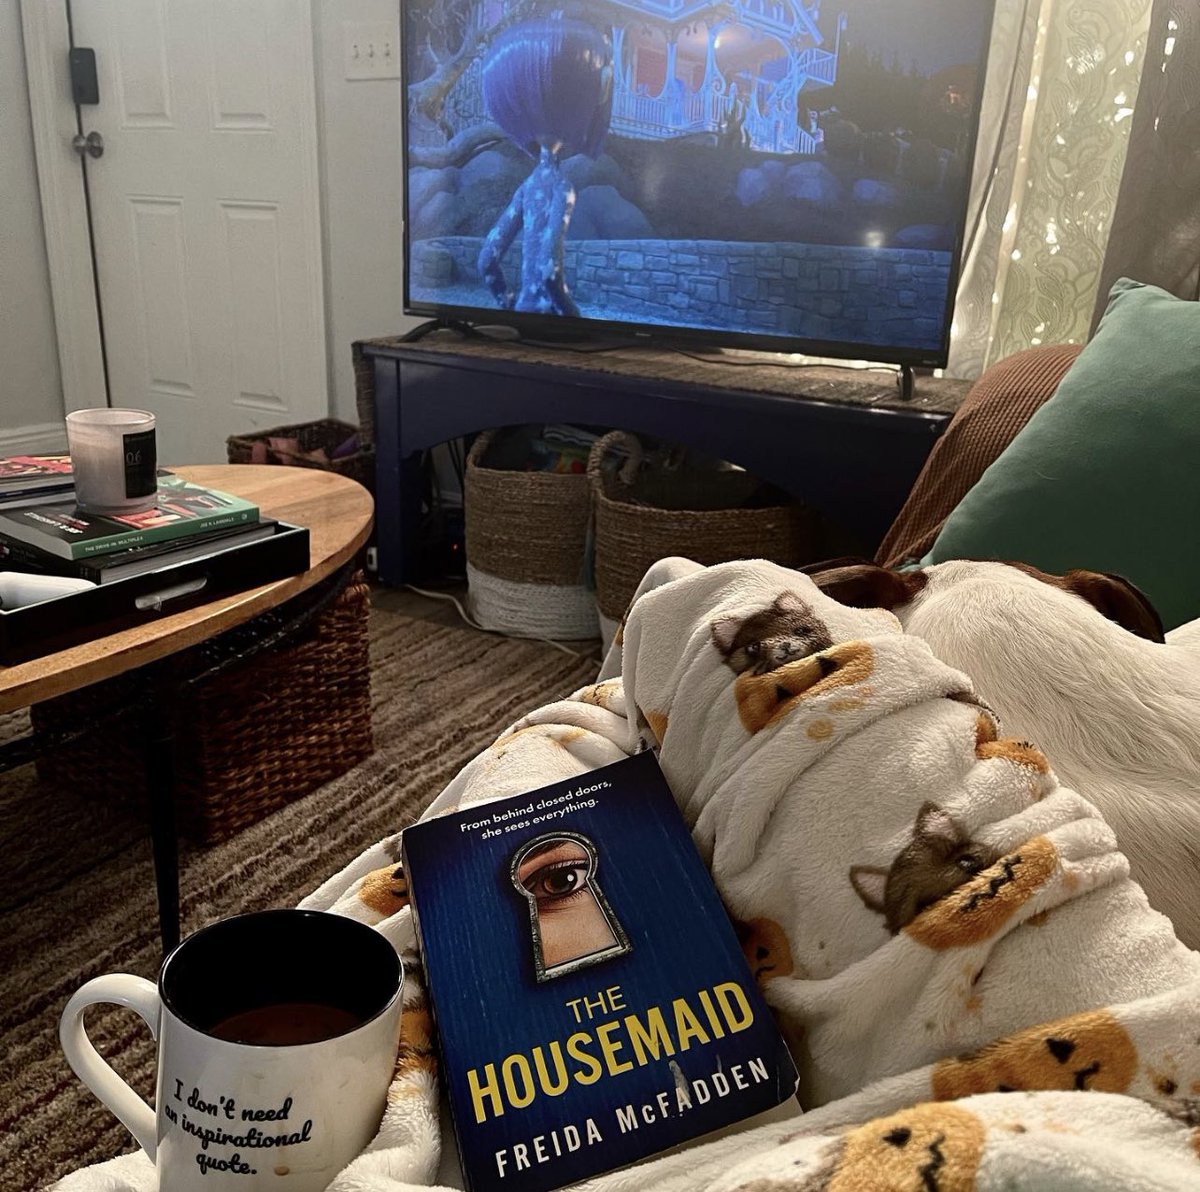 My current situation.  

Happy Sunday friends! 

#amreading #cozyhome #amwatching